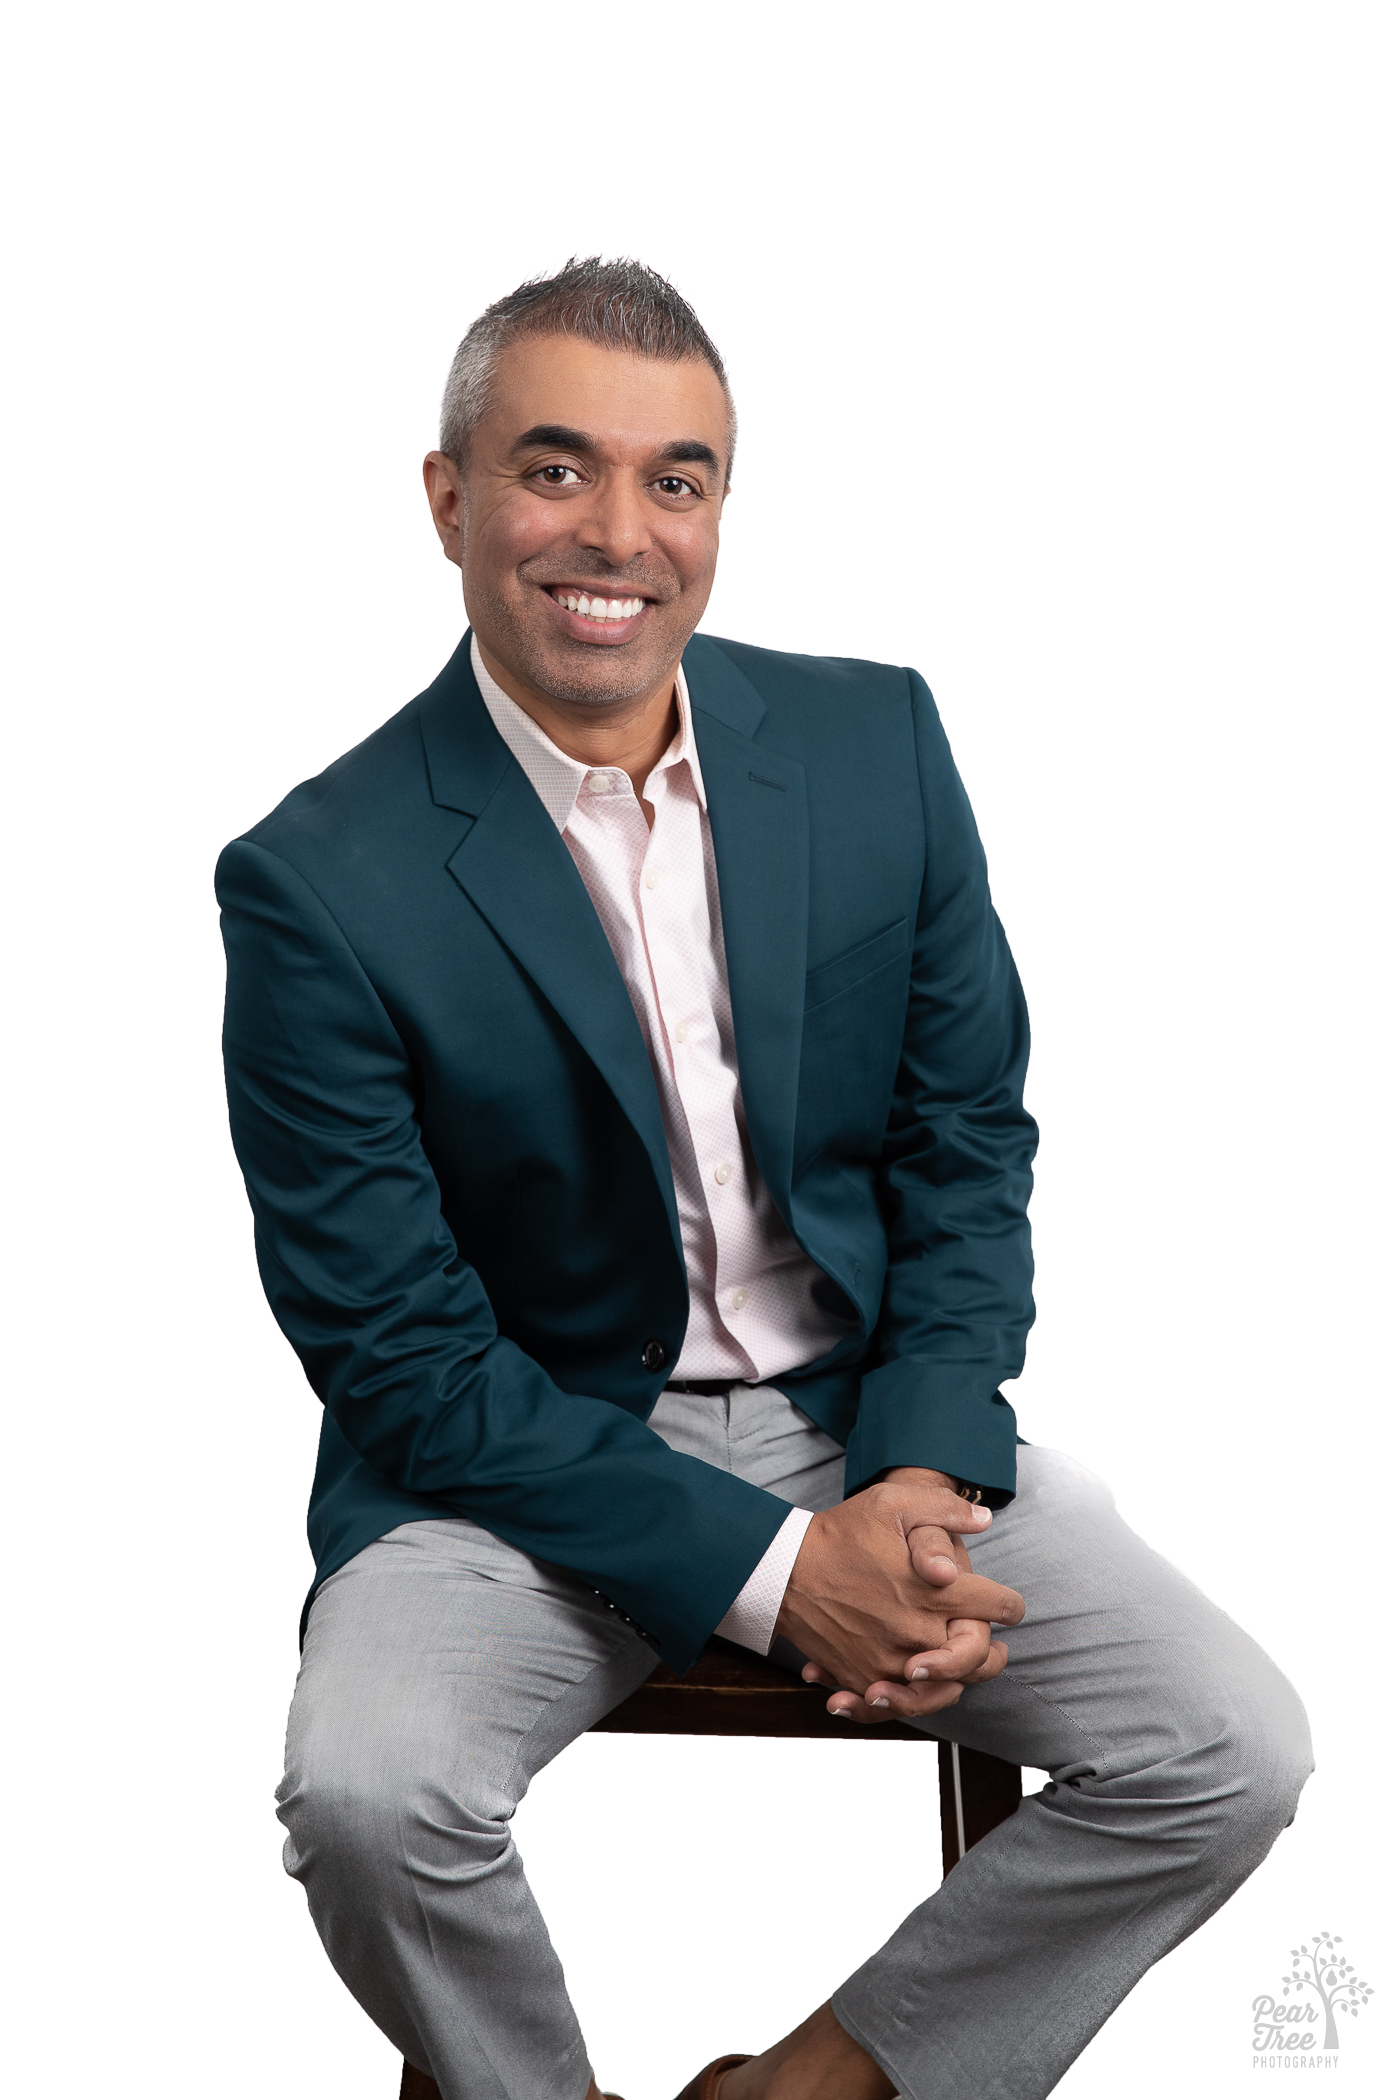 Engaging Indian American Realtor Minesh Patel sitting on a stool and smiling for realtor professional headshots. He's wearing grey slacks, a teal blazer, and light pink button down shirt.